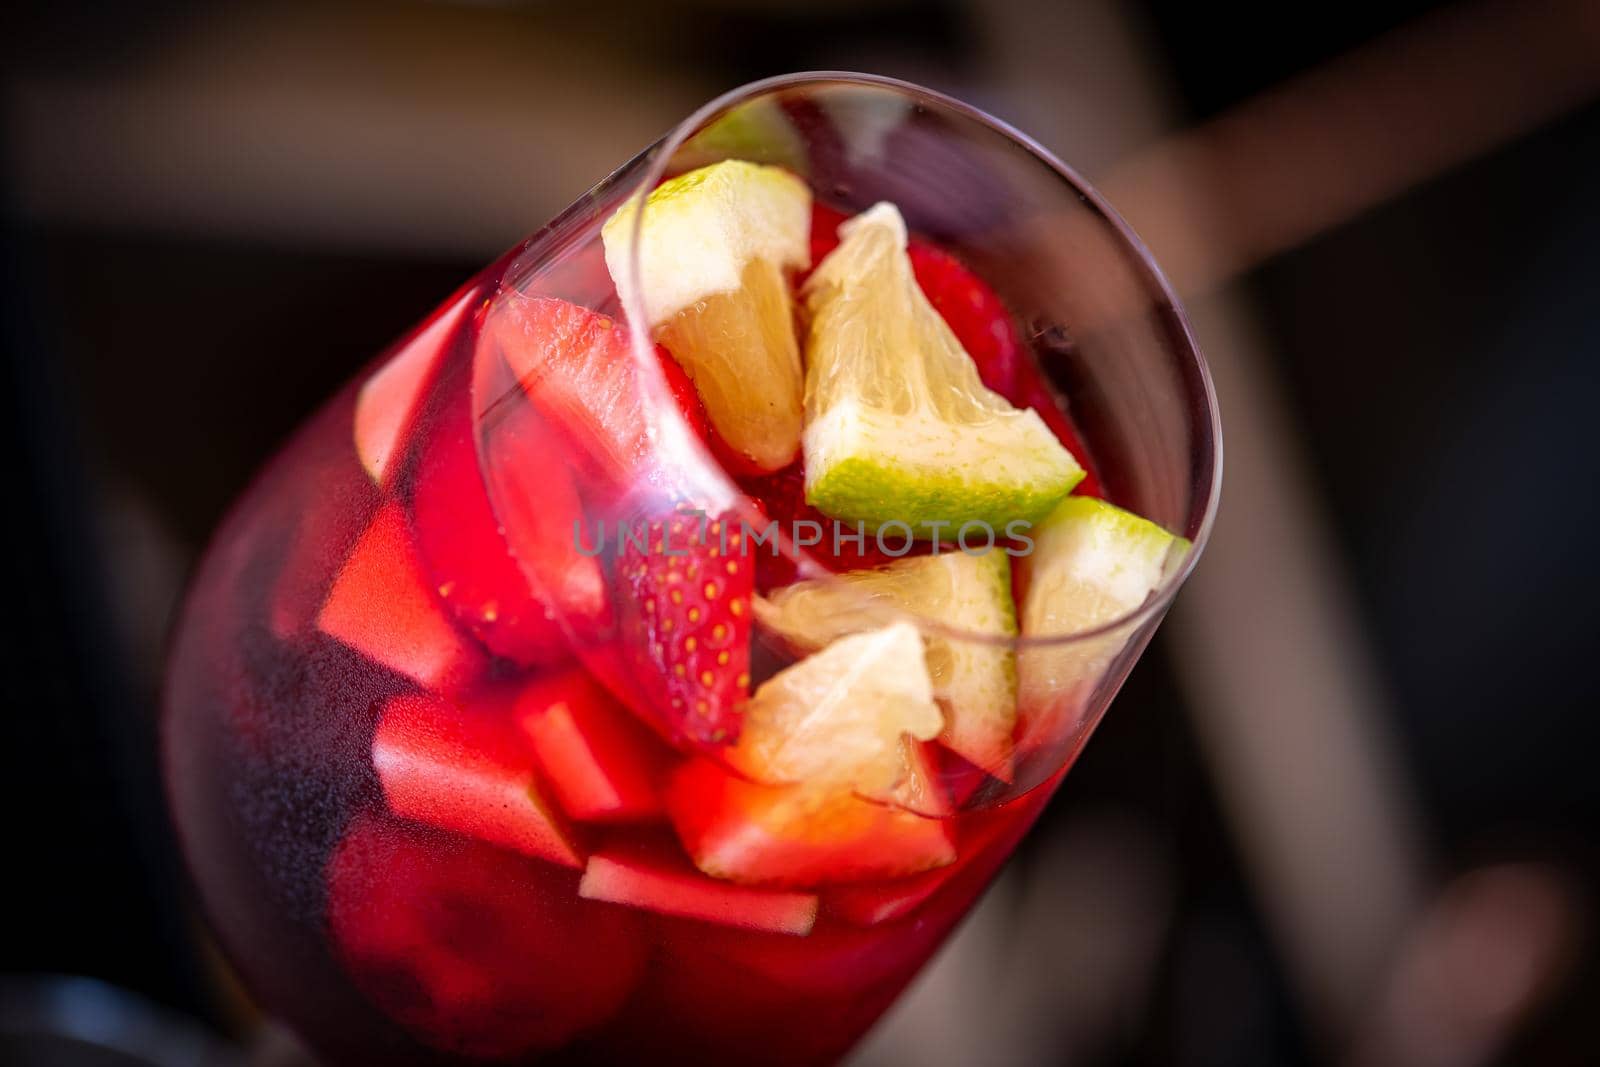 Glass of red Sangria and fruits on dark stone table